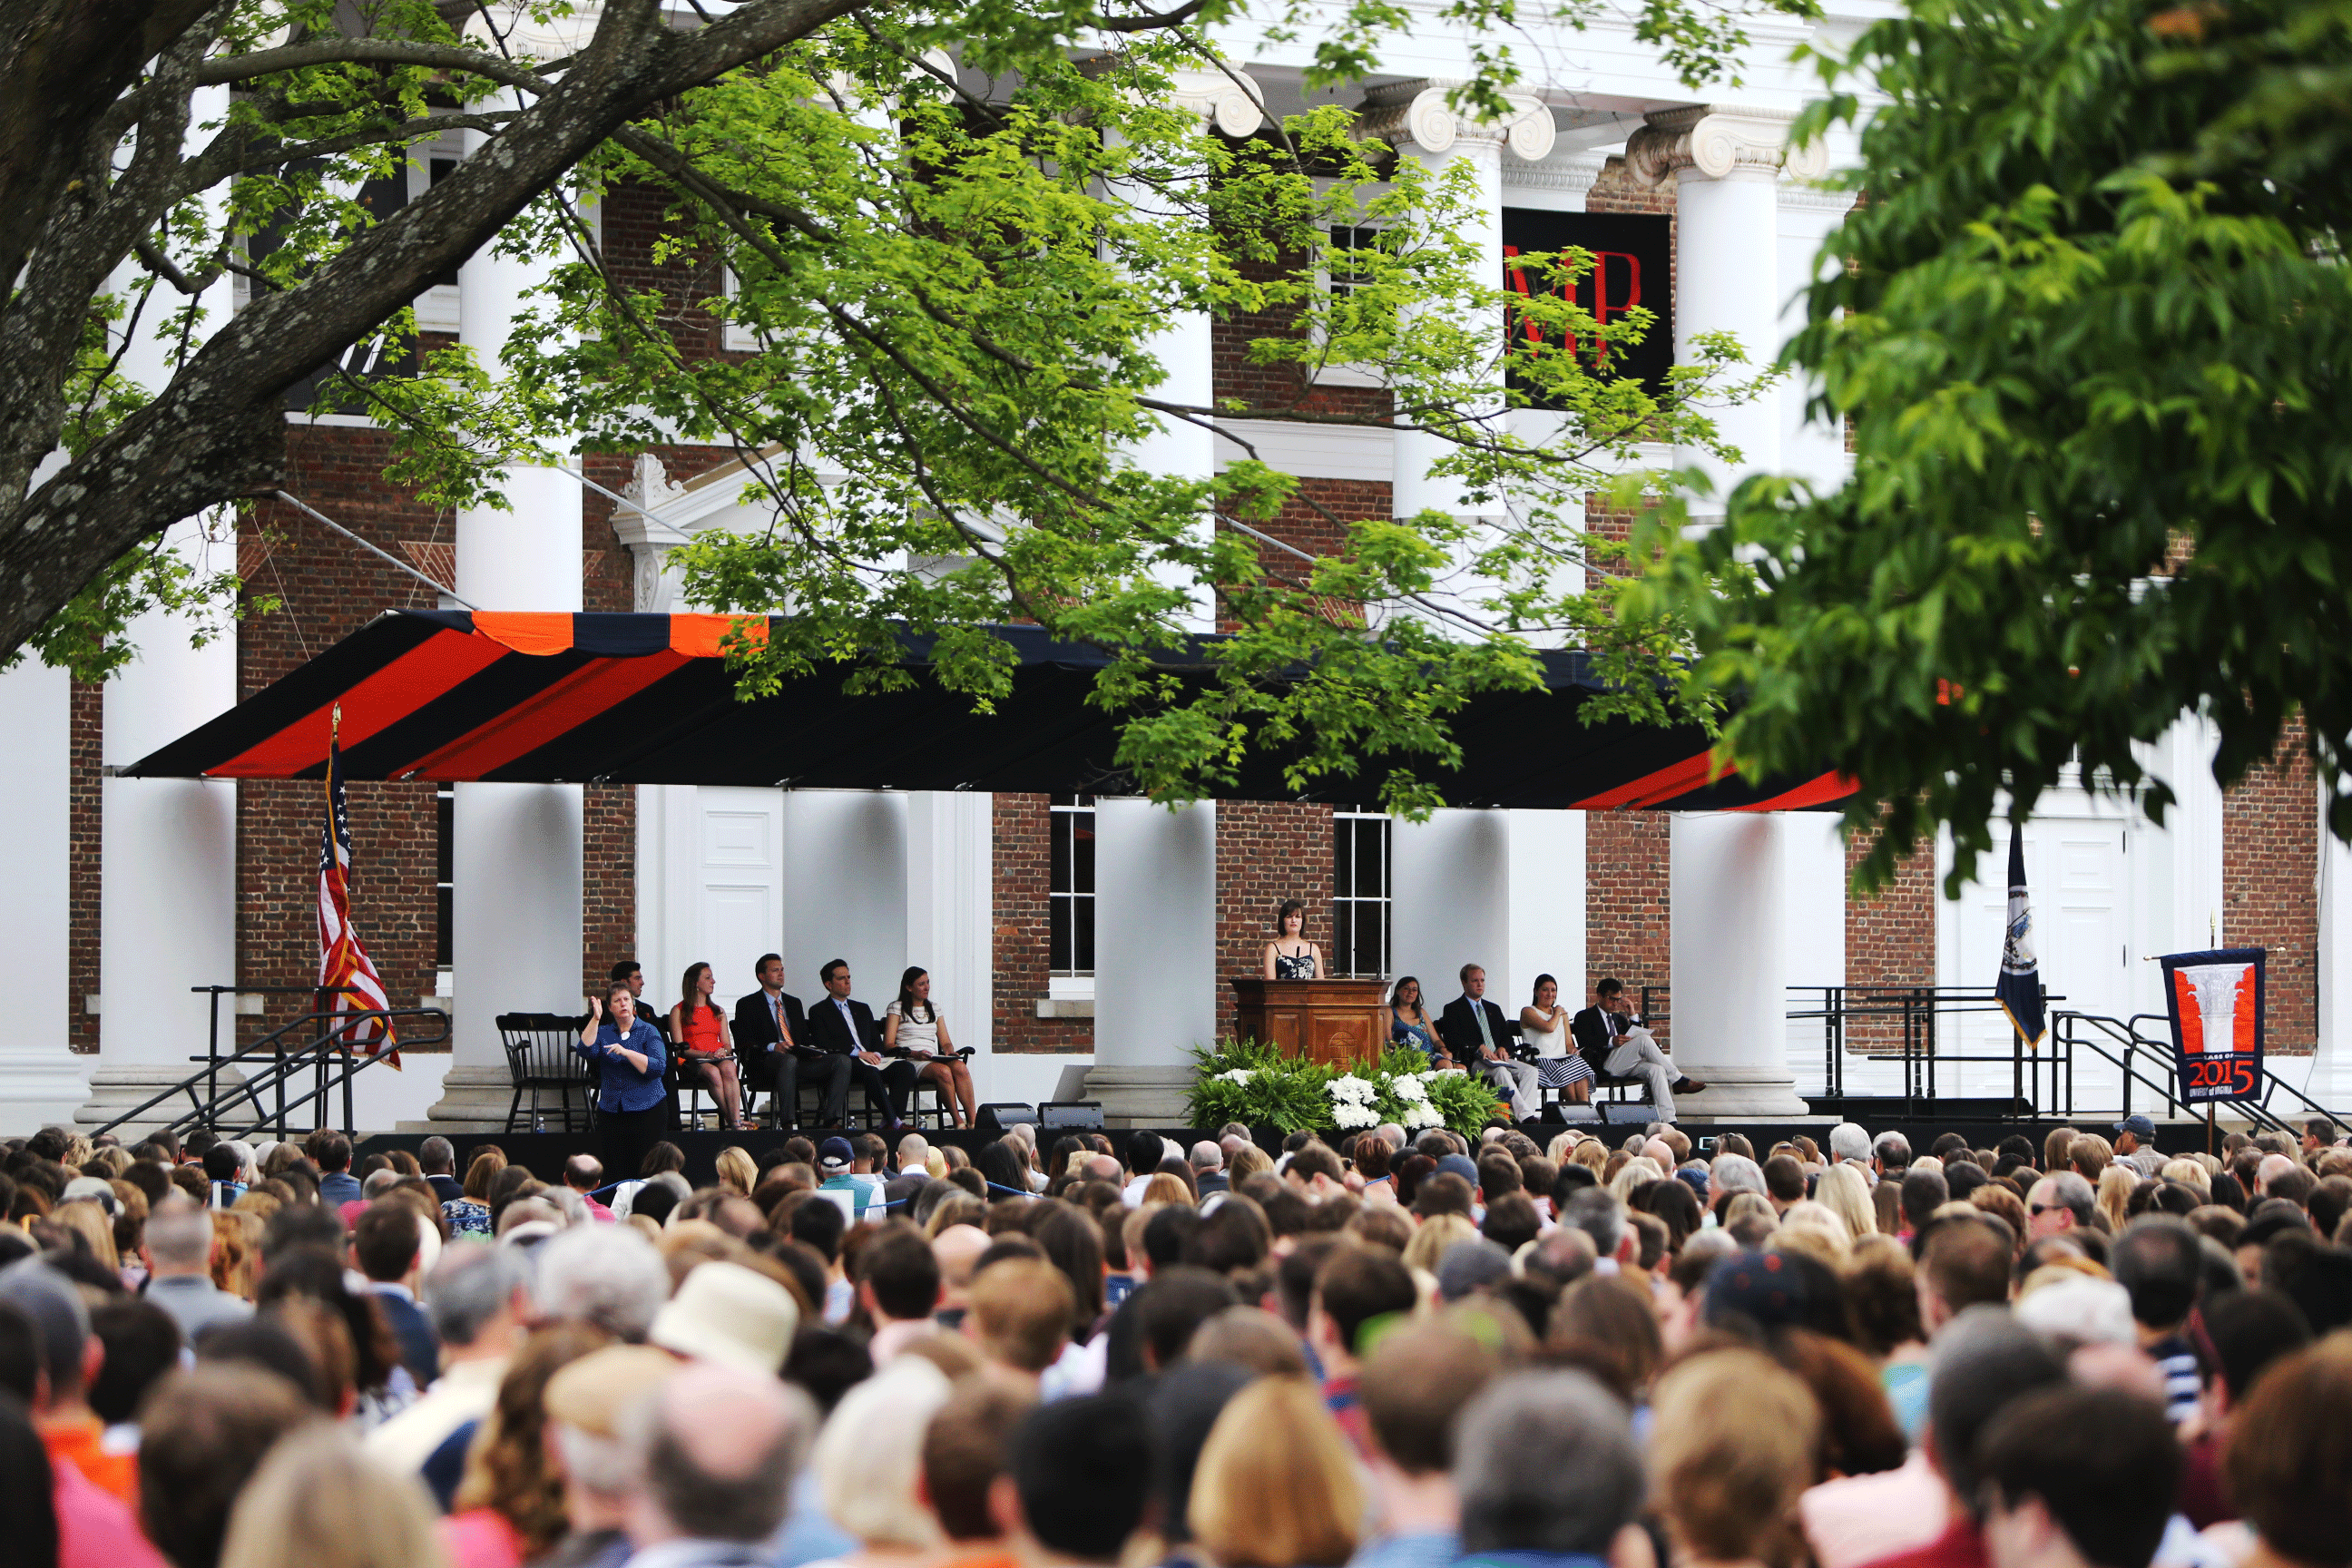 Crowd listening to a speaker on a stage in front of Old Cabell Hall